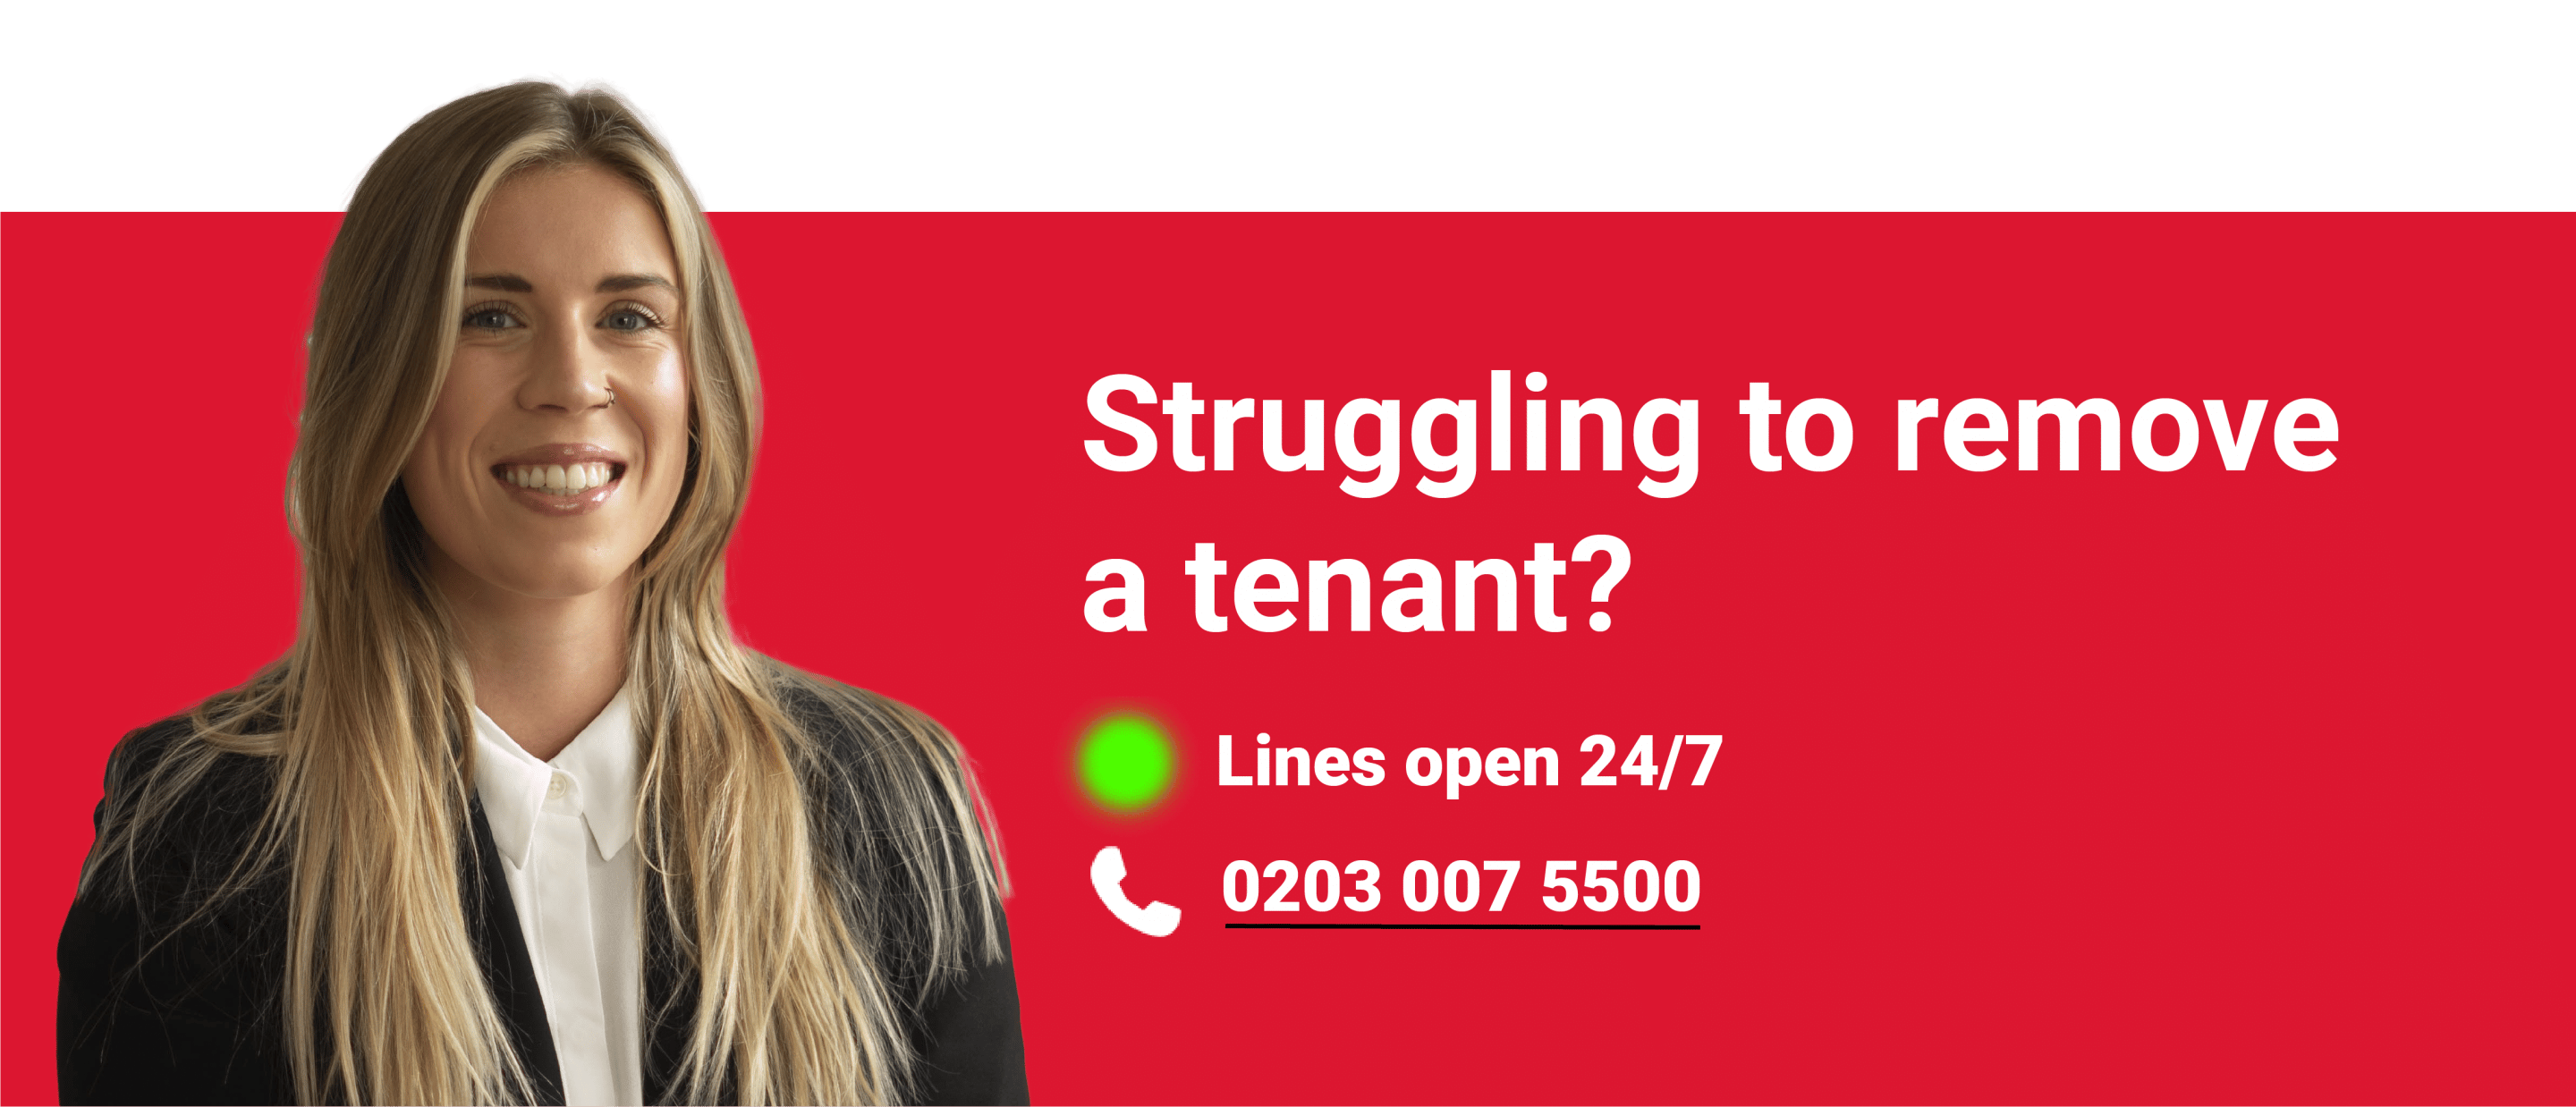 call to action on removing a tenant